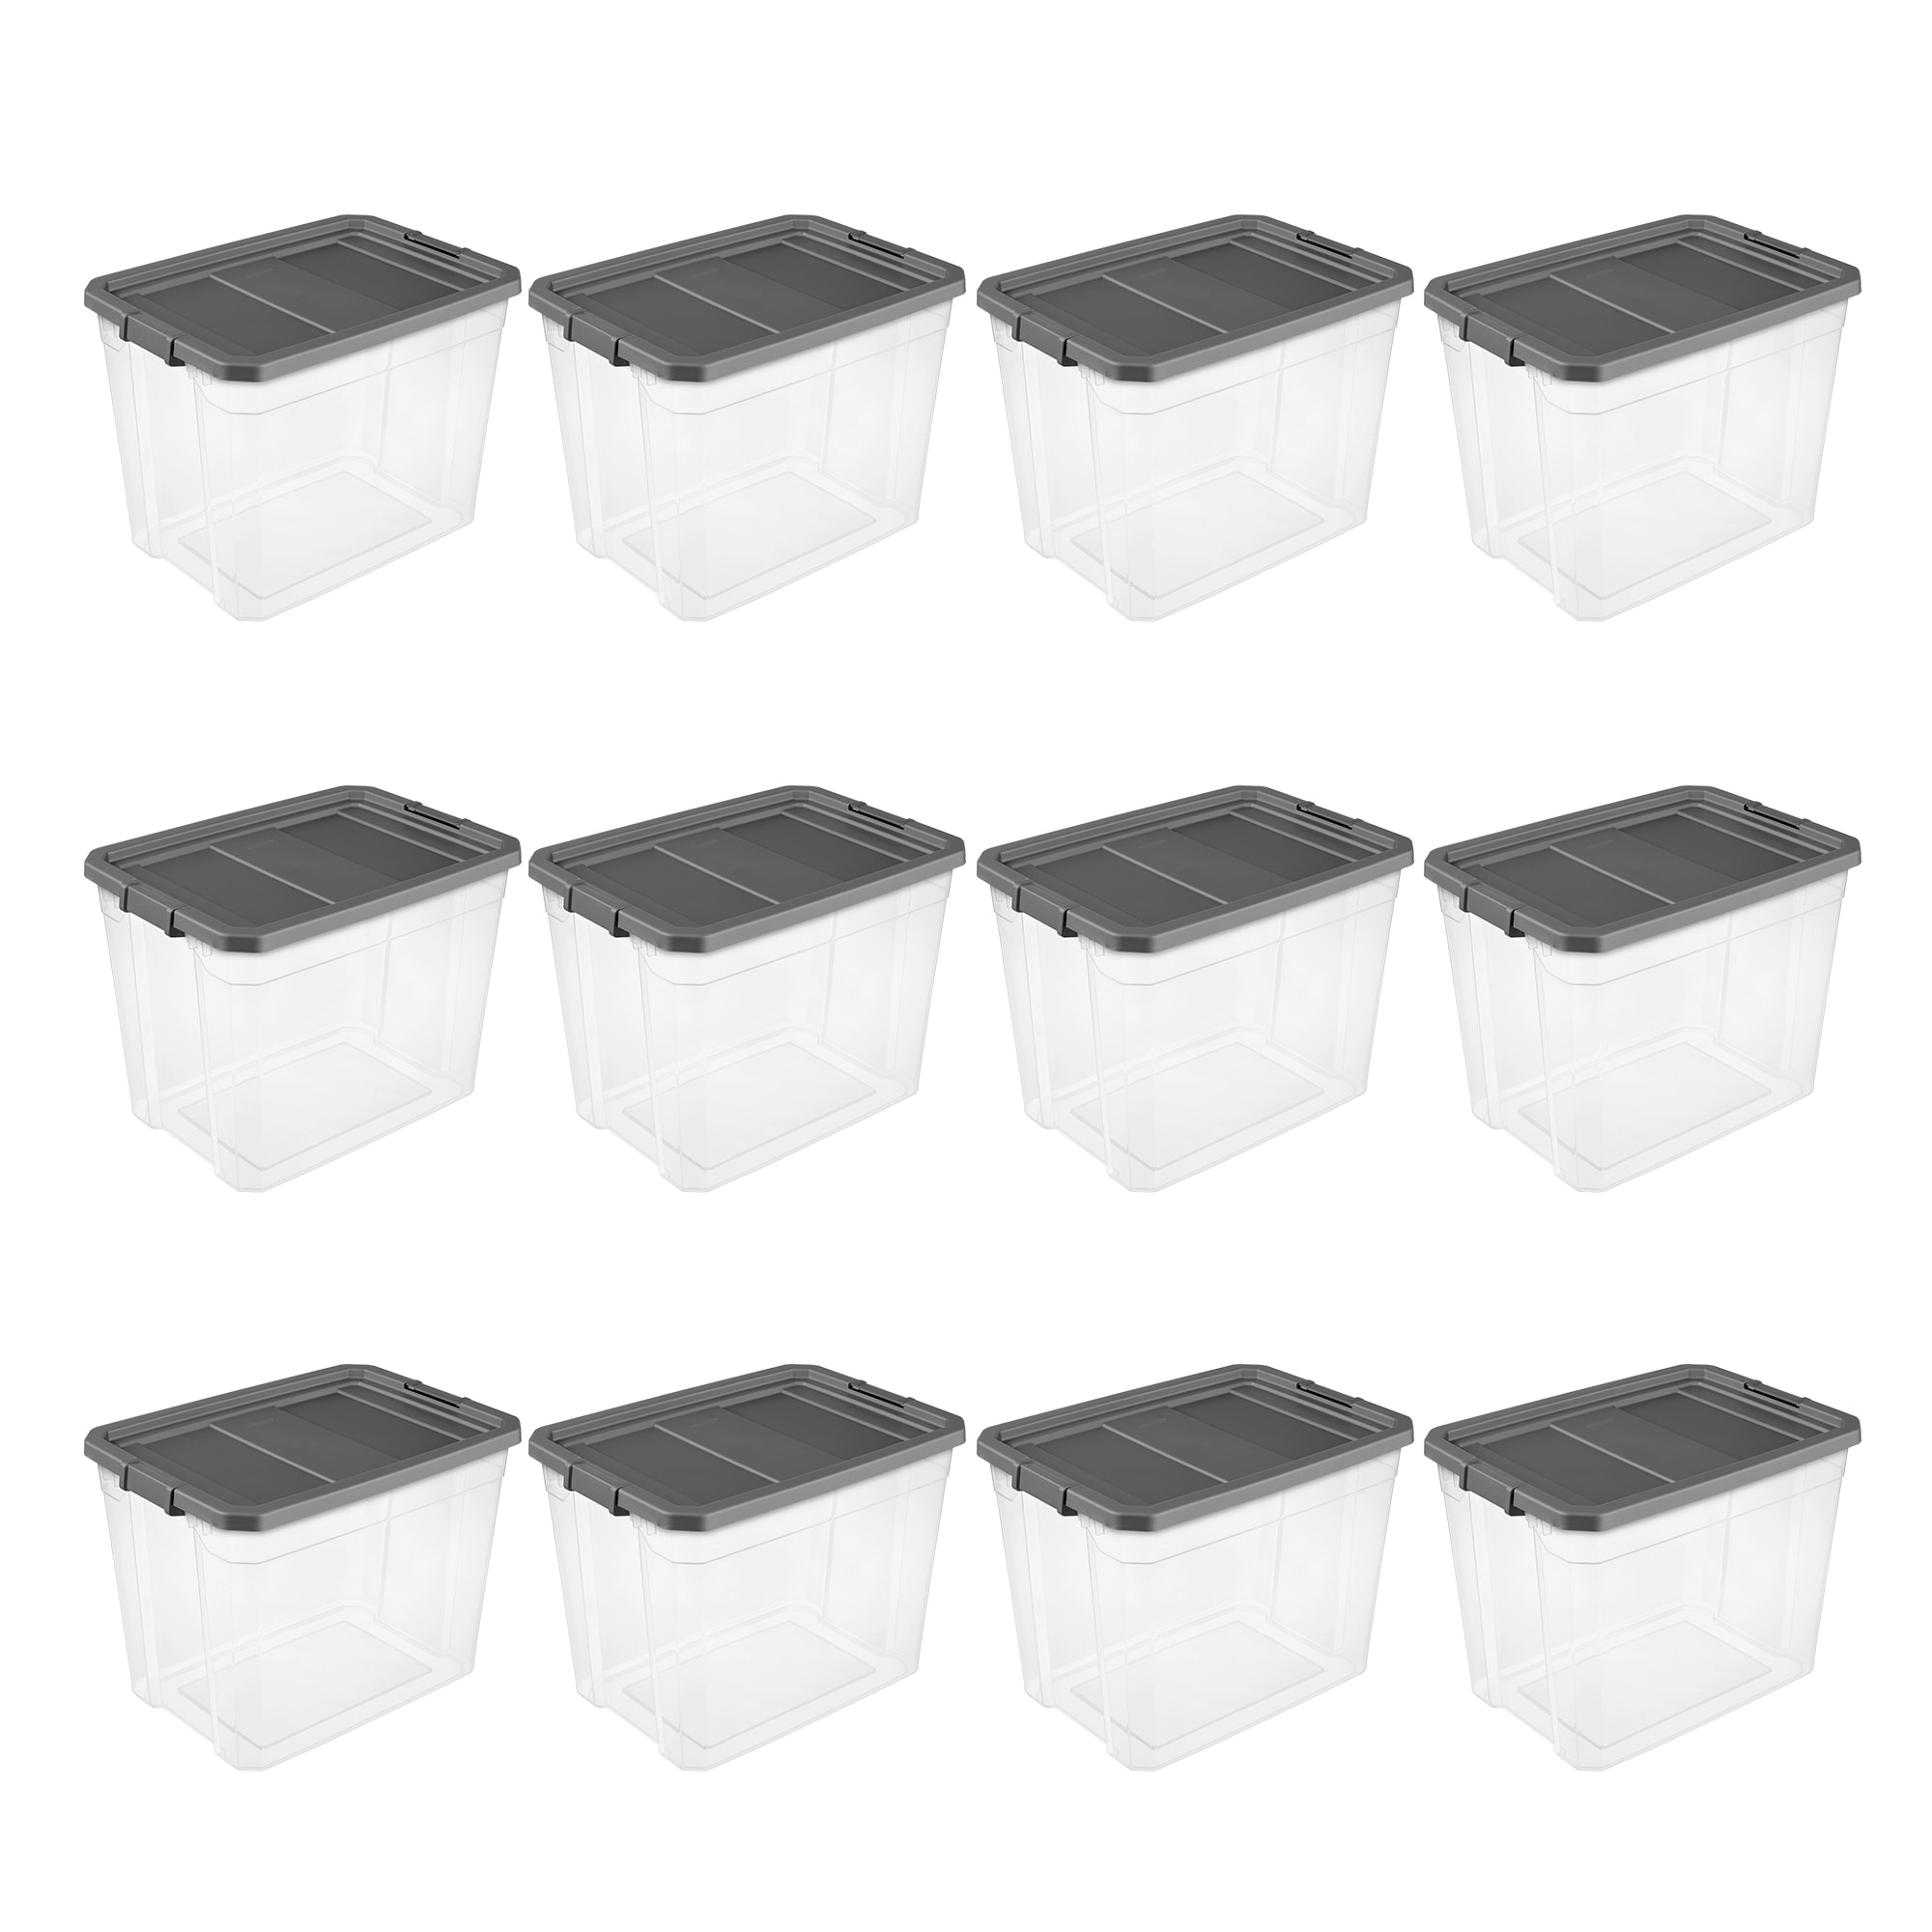 Sterilite Storage Bin with Carry Through Handles - Clear, 1 ct - Smith's  Food and Drug